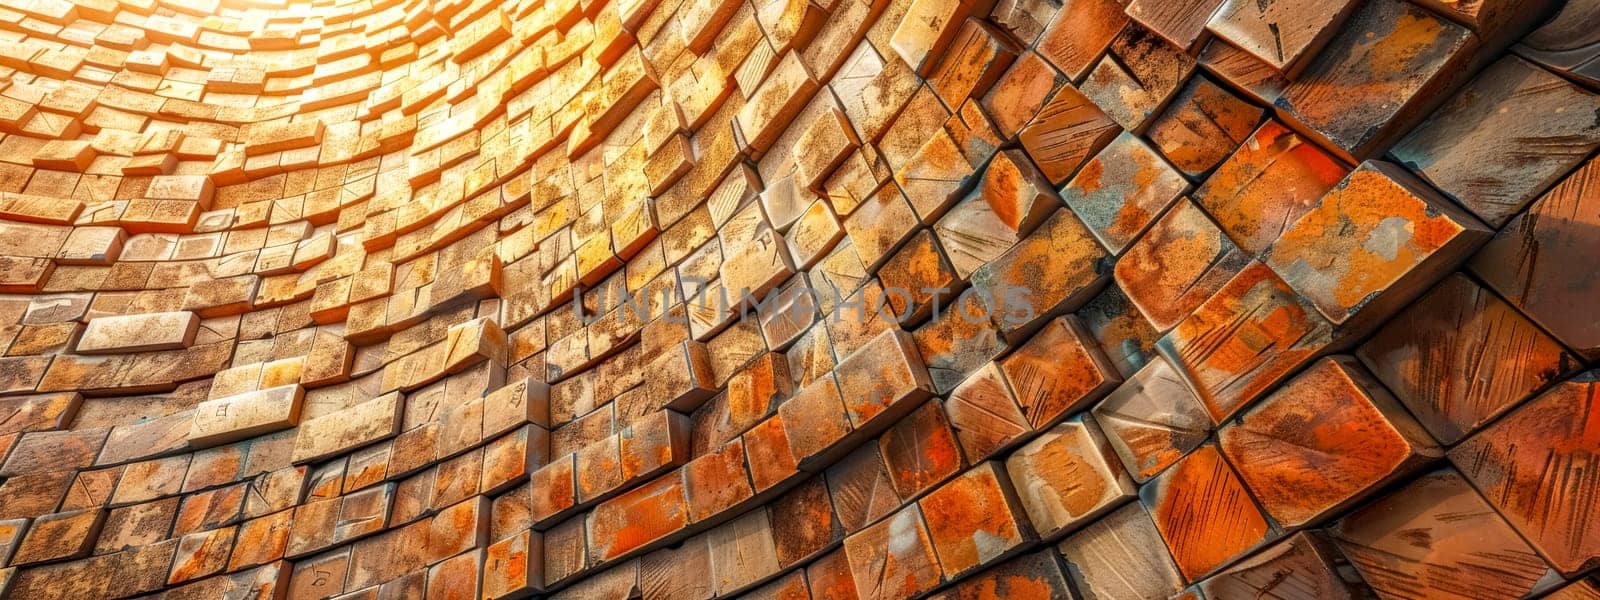 Abstract geometric wall texture under warm light by Edophoto